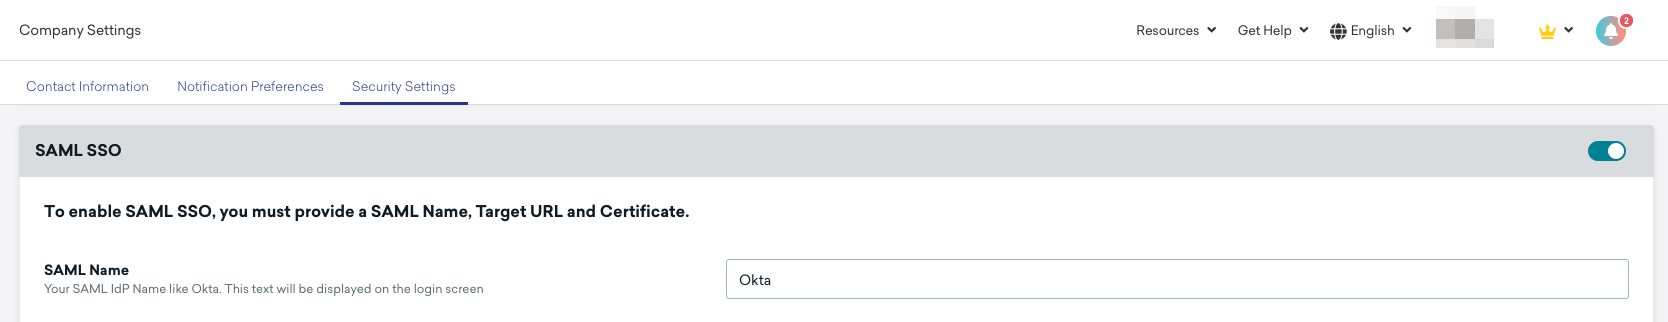 Okta SAML SSO enabled on the Security Settings page